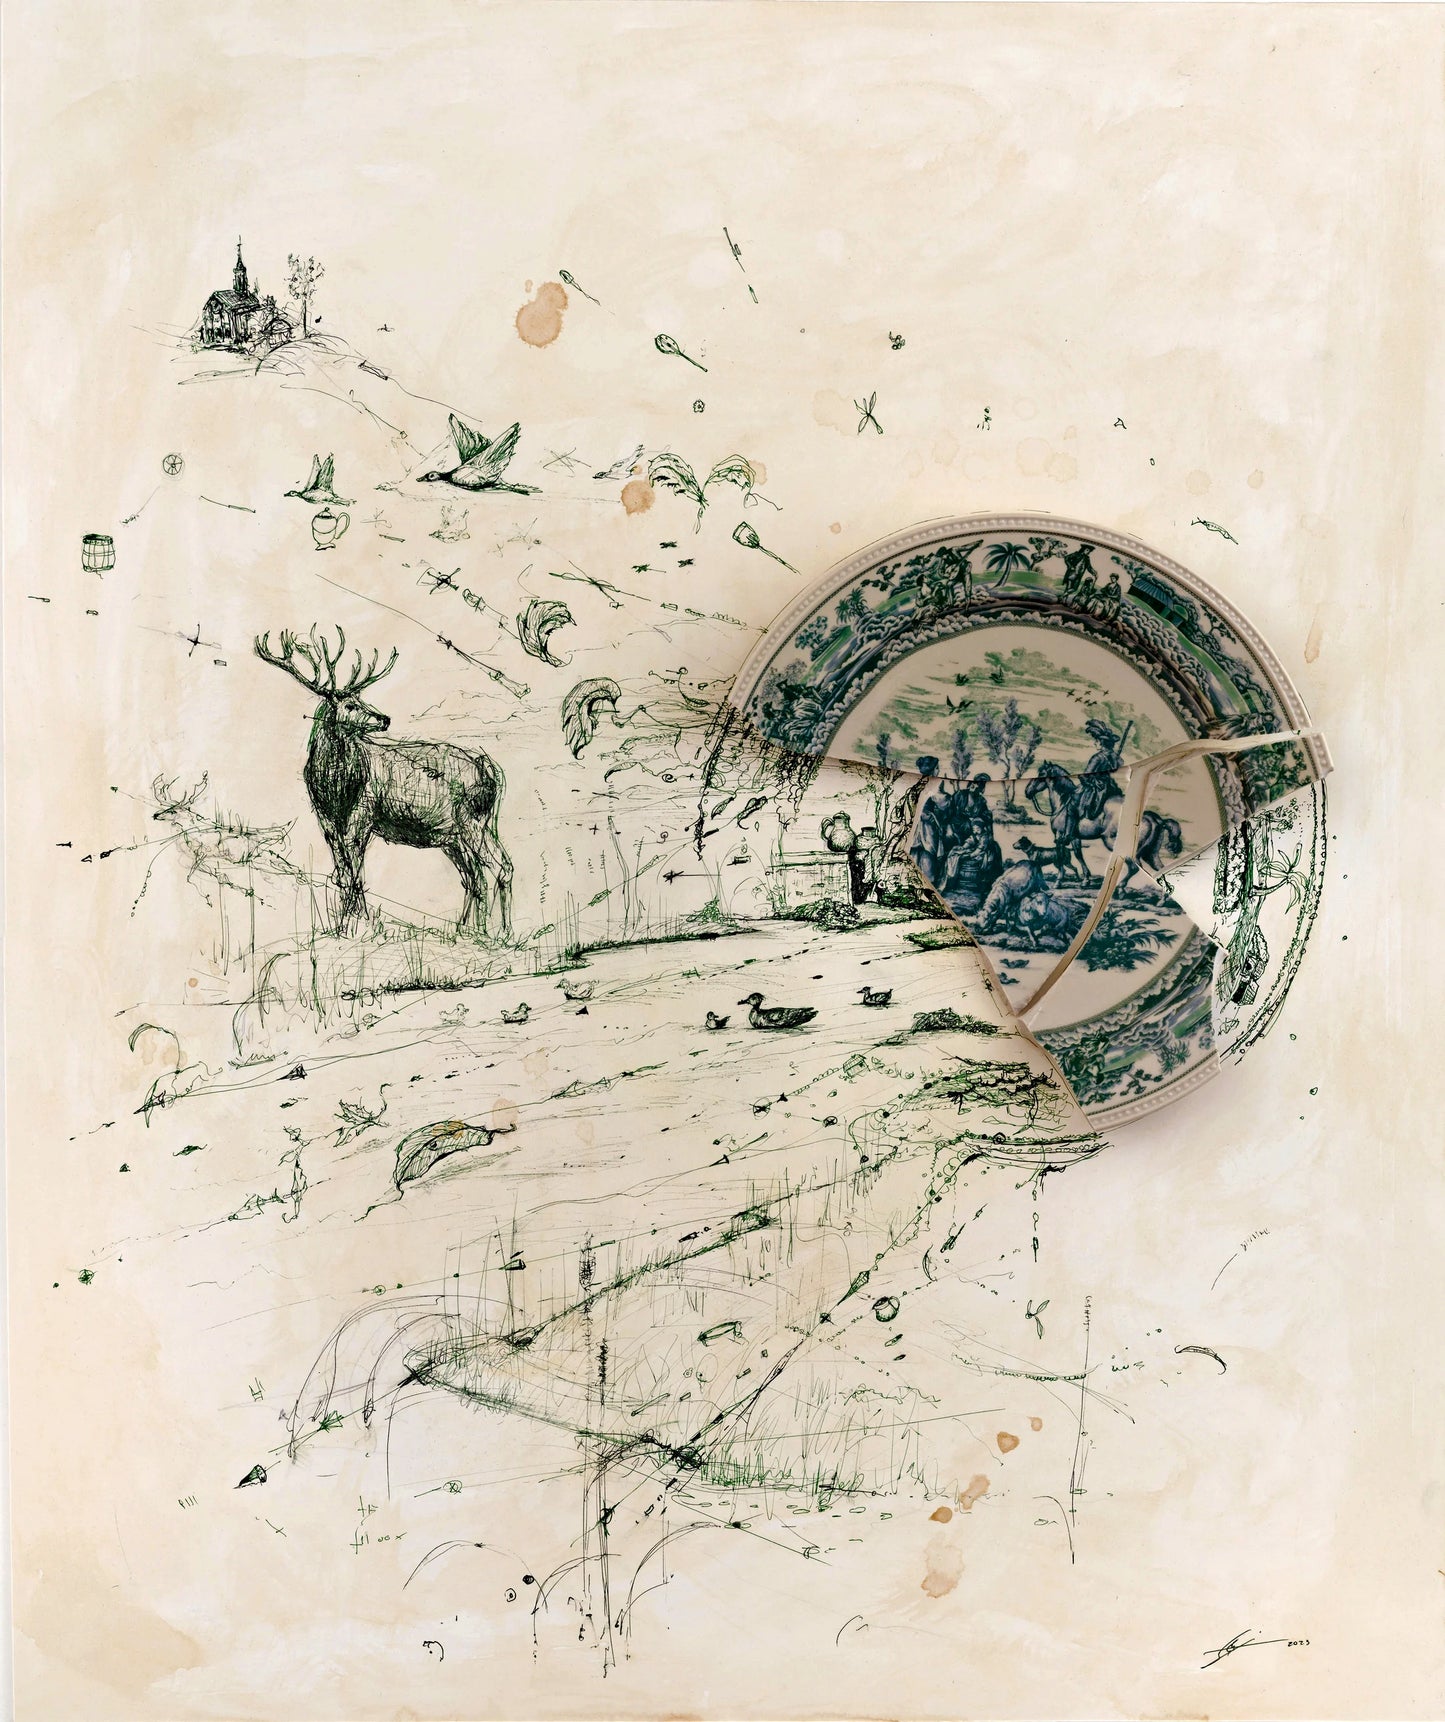 "Fragmented in Green with Stag and Stream"